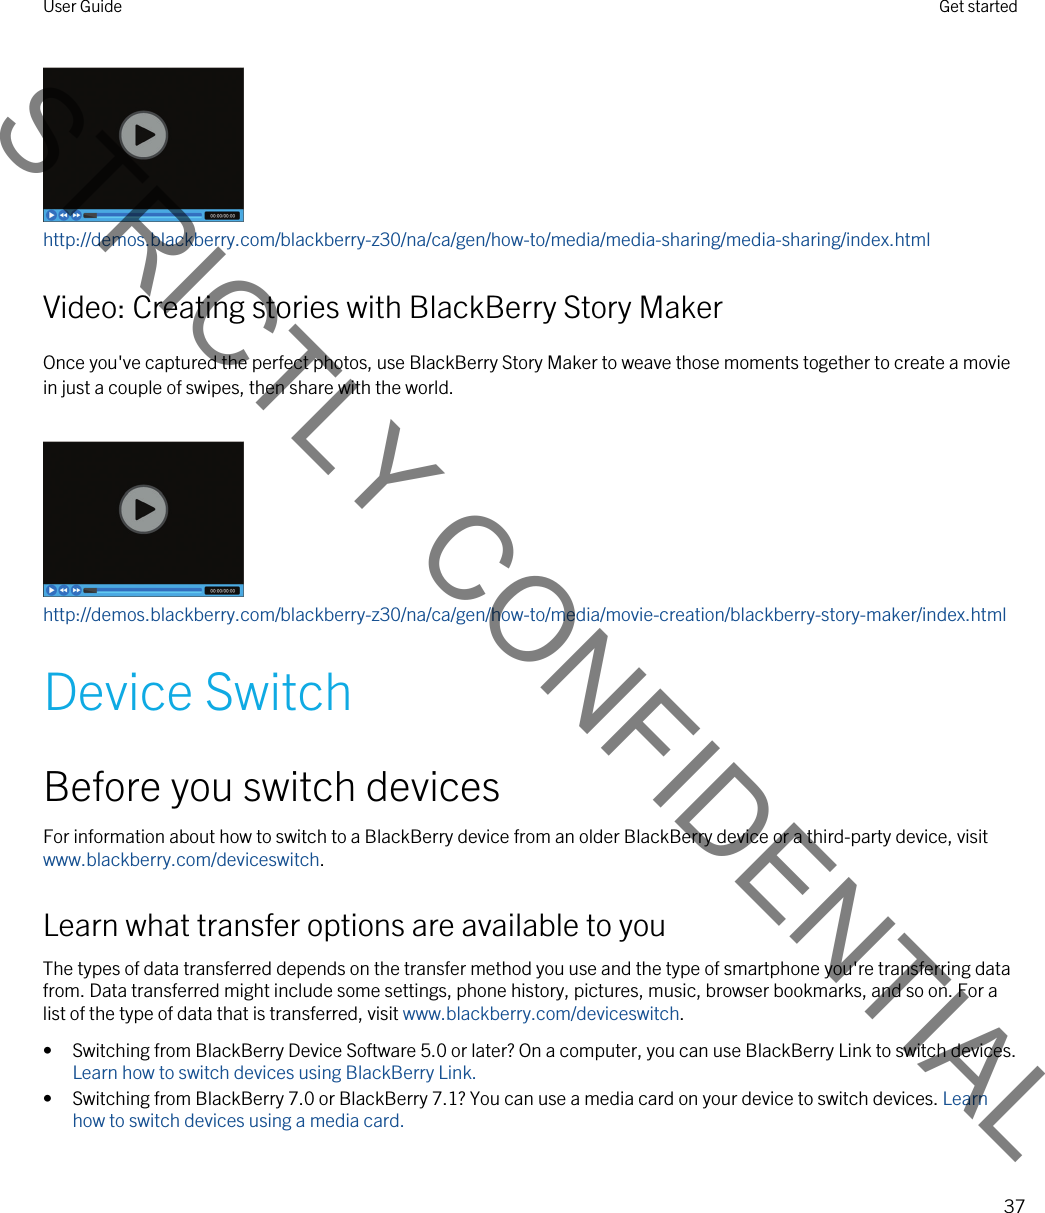 http://demos.blackberry.com/blackberry-z30/na/ca/gen/how-to/media/media-sharing/media-sharing/index.htmlVideo: Creating stories with BlackBerry Story MakerOnce you&apos;ve captured the perfect photos, use BlackBerry Story Maker to weave those moments together to create a movie in just a couple of swipes, then share with the world.http://demos.blackberry.com/blackberry-z30/na/ca/gen/how-to/media/movie-creation/blackberry-story-maker/index.htmlDevice SwitchBefore you switch devicesFor information about how to switch to a BlackBerry device from an older BlackBerry device or a third-party device, visit www.blackberry.com/deviceswitch.Learn what transfer options are available to youThe types of data transferred depends on the transfer method you use and the type of smartphone you&apos;re transferring data from. Data transferred might include some settings, phone history, pictures, music, browser bookmarks, and so on. For a list of the type of data that is transferred, visit www.blackberry.com/deviceswitch.• Switching from BlackBerry Device Software 5.0 or later? On a computer, you can use BlackBerry Link to switch devices. Learn how to switch devices using BlackBerry Link.• Switching from BlackBerry 7.0 or BlackBerry 7.1? You can use a media card on your device to switch devices. Learn how to switch devices using a media card.User Guide Get started37STRICTLY CONFIDENTIAL